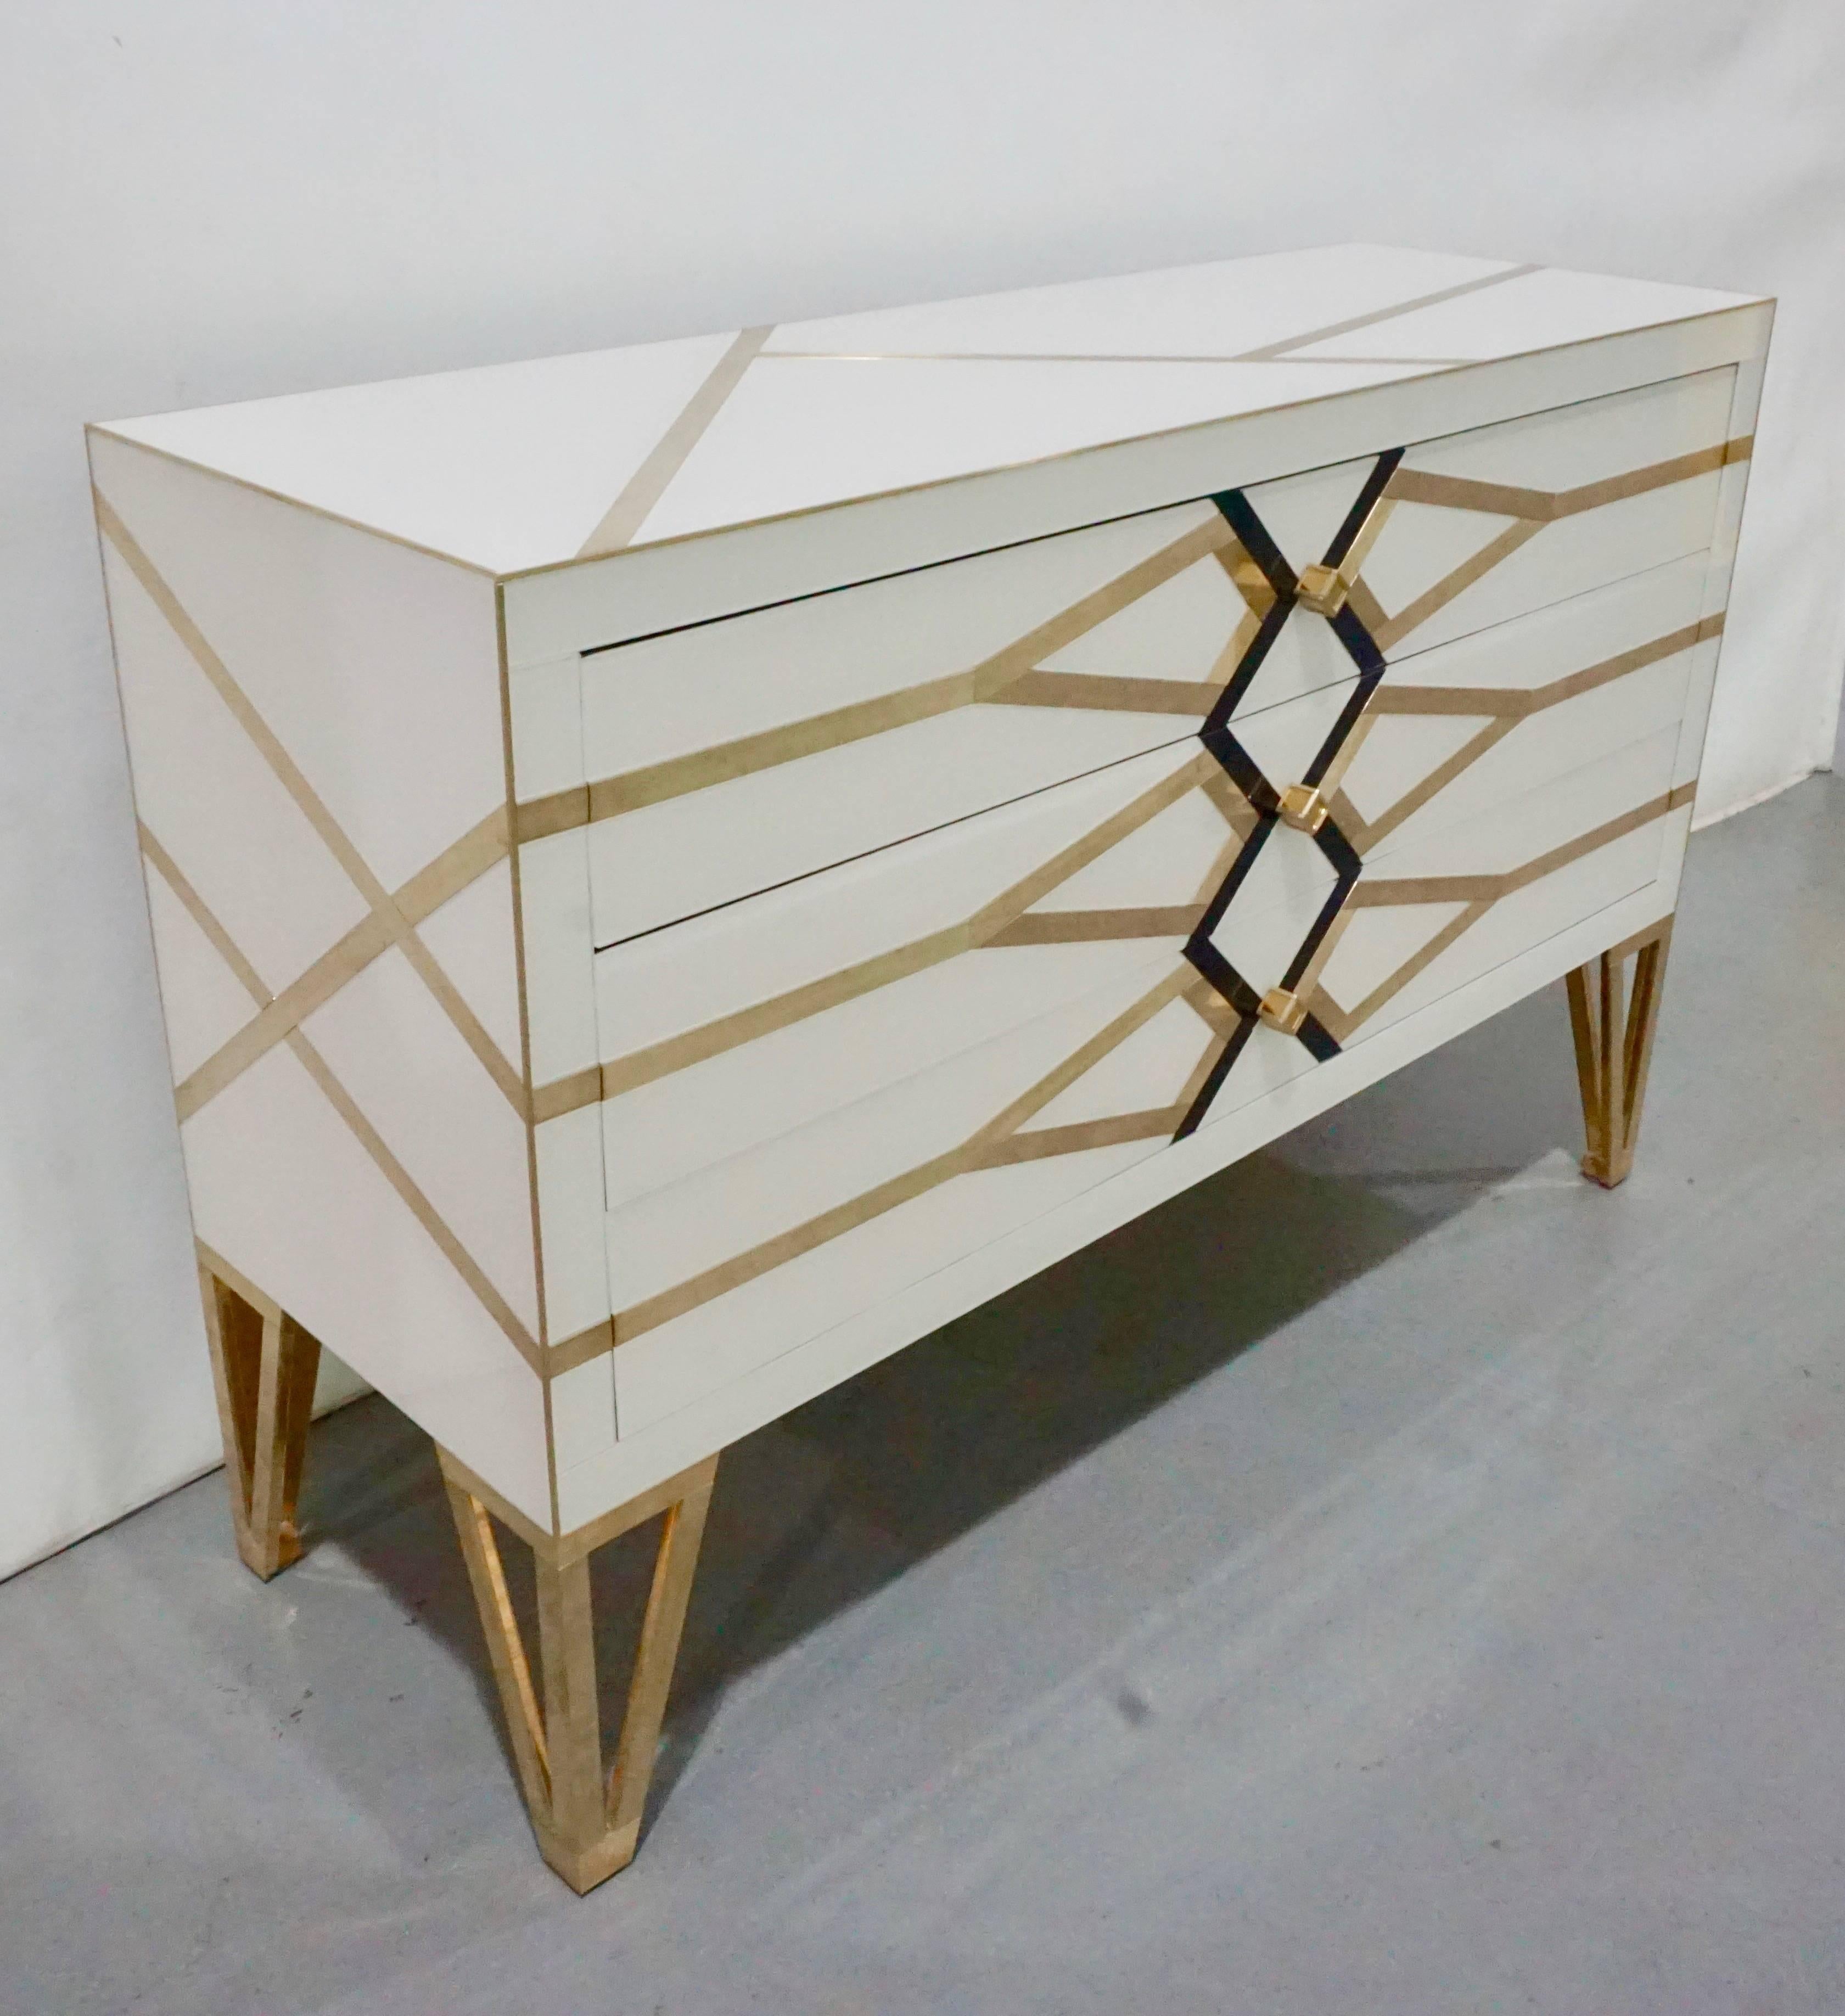 Italian three-drawer customizable commode / sideboard, entirely handmade, exclusive modern Art Deco design by Cosulich Interiors, showing high quality and elegance of execution: the surround in ivory white is decorated with a geometric architectural